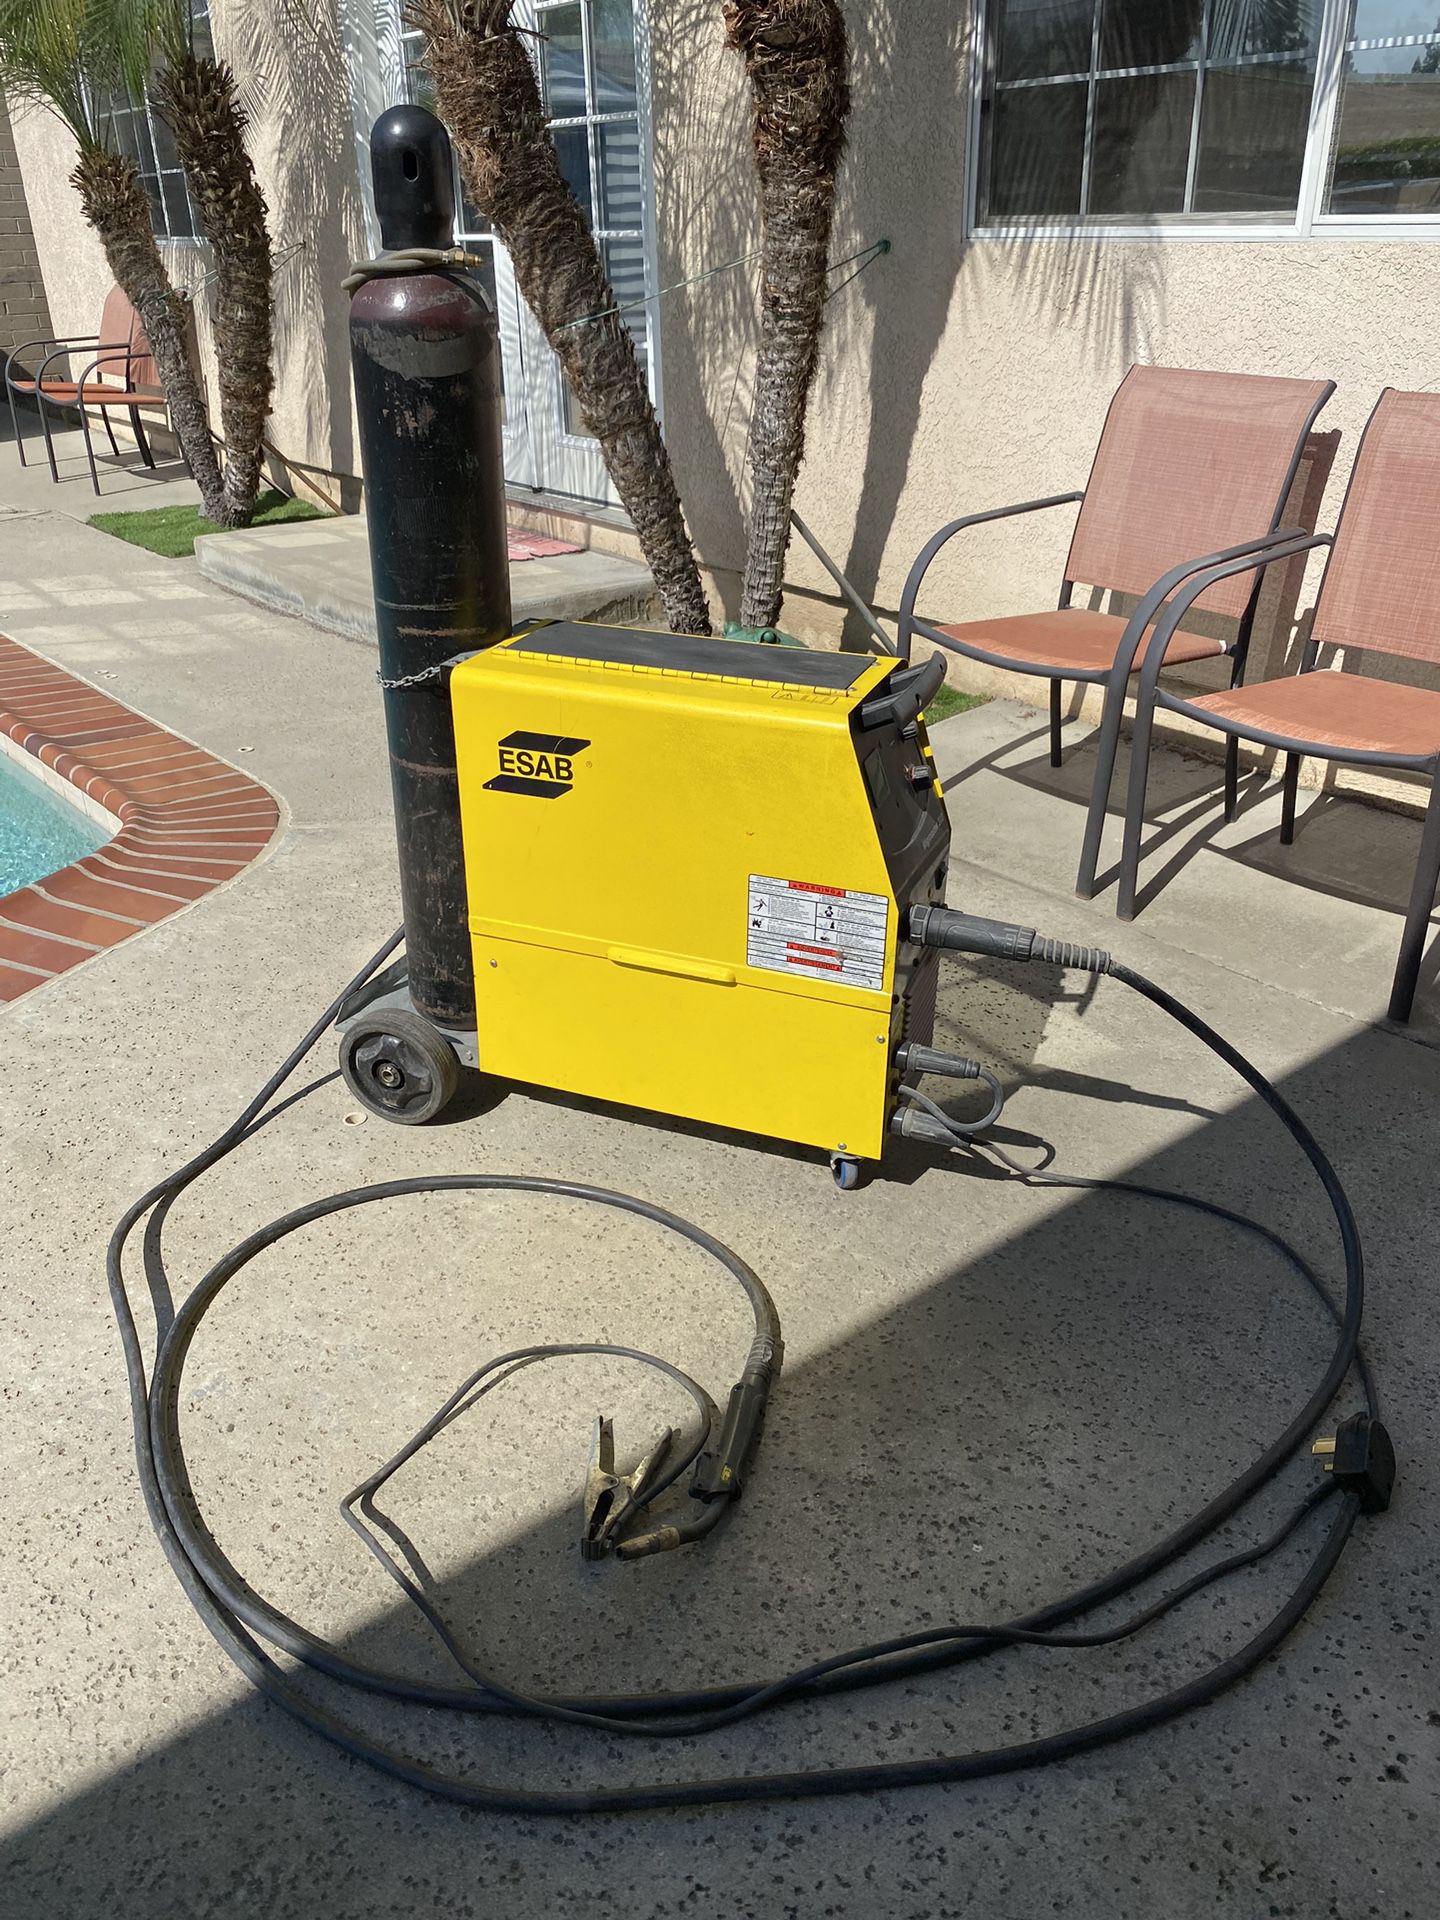 ESAB Migmaster 203 Mig Welder With Bottle And Leads